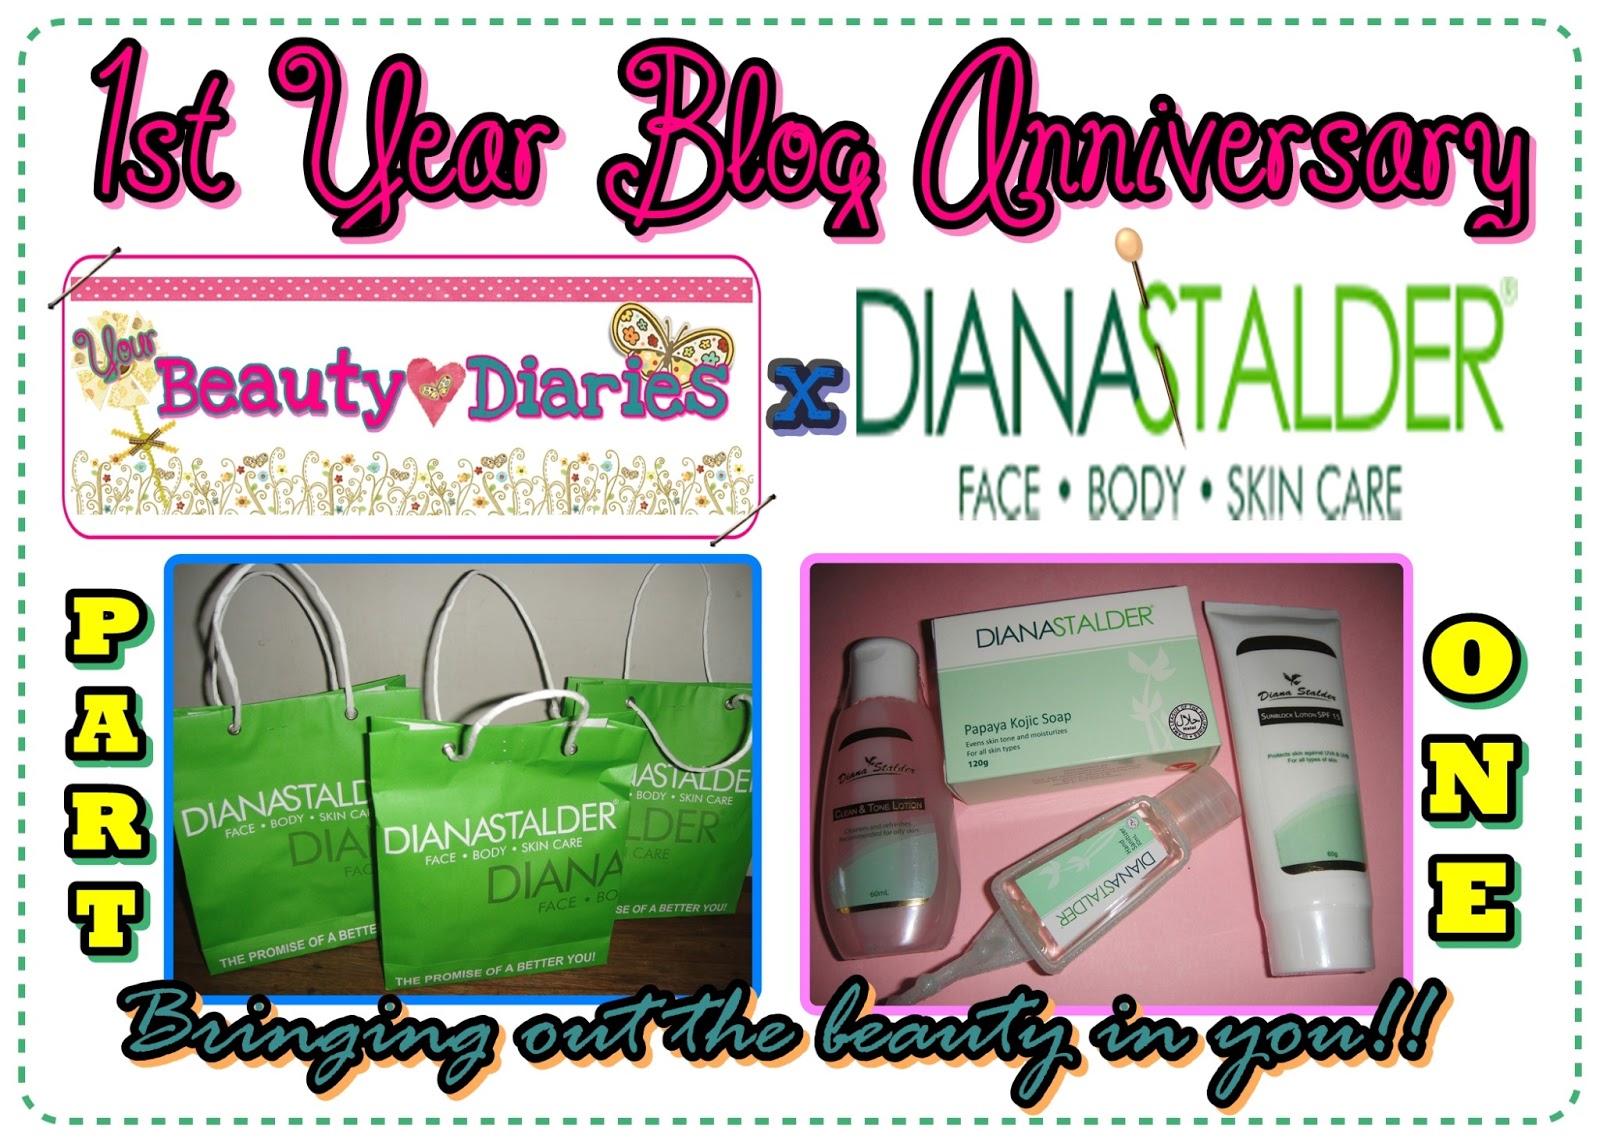 Your Beauty Diaries 1st Year Anniversary Blog